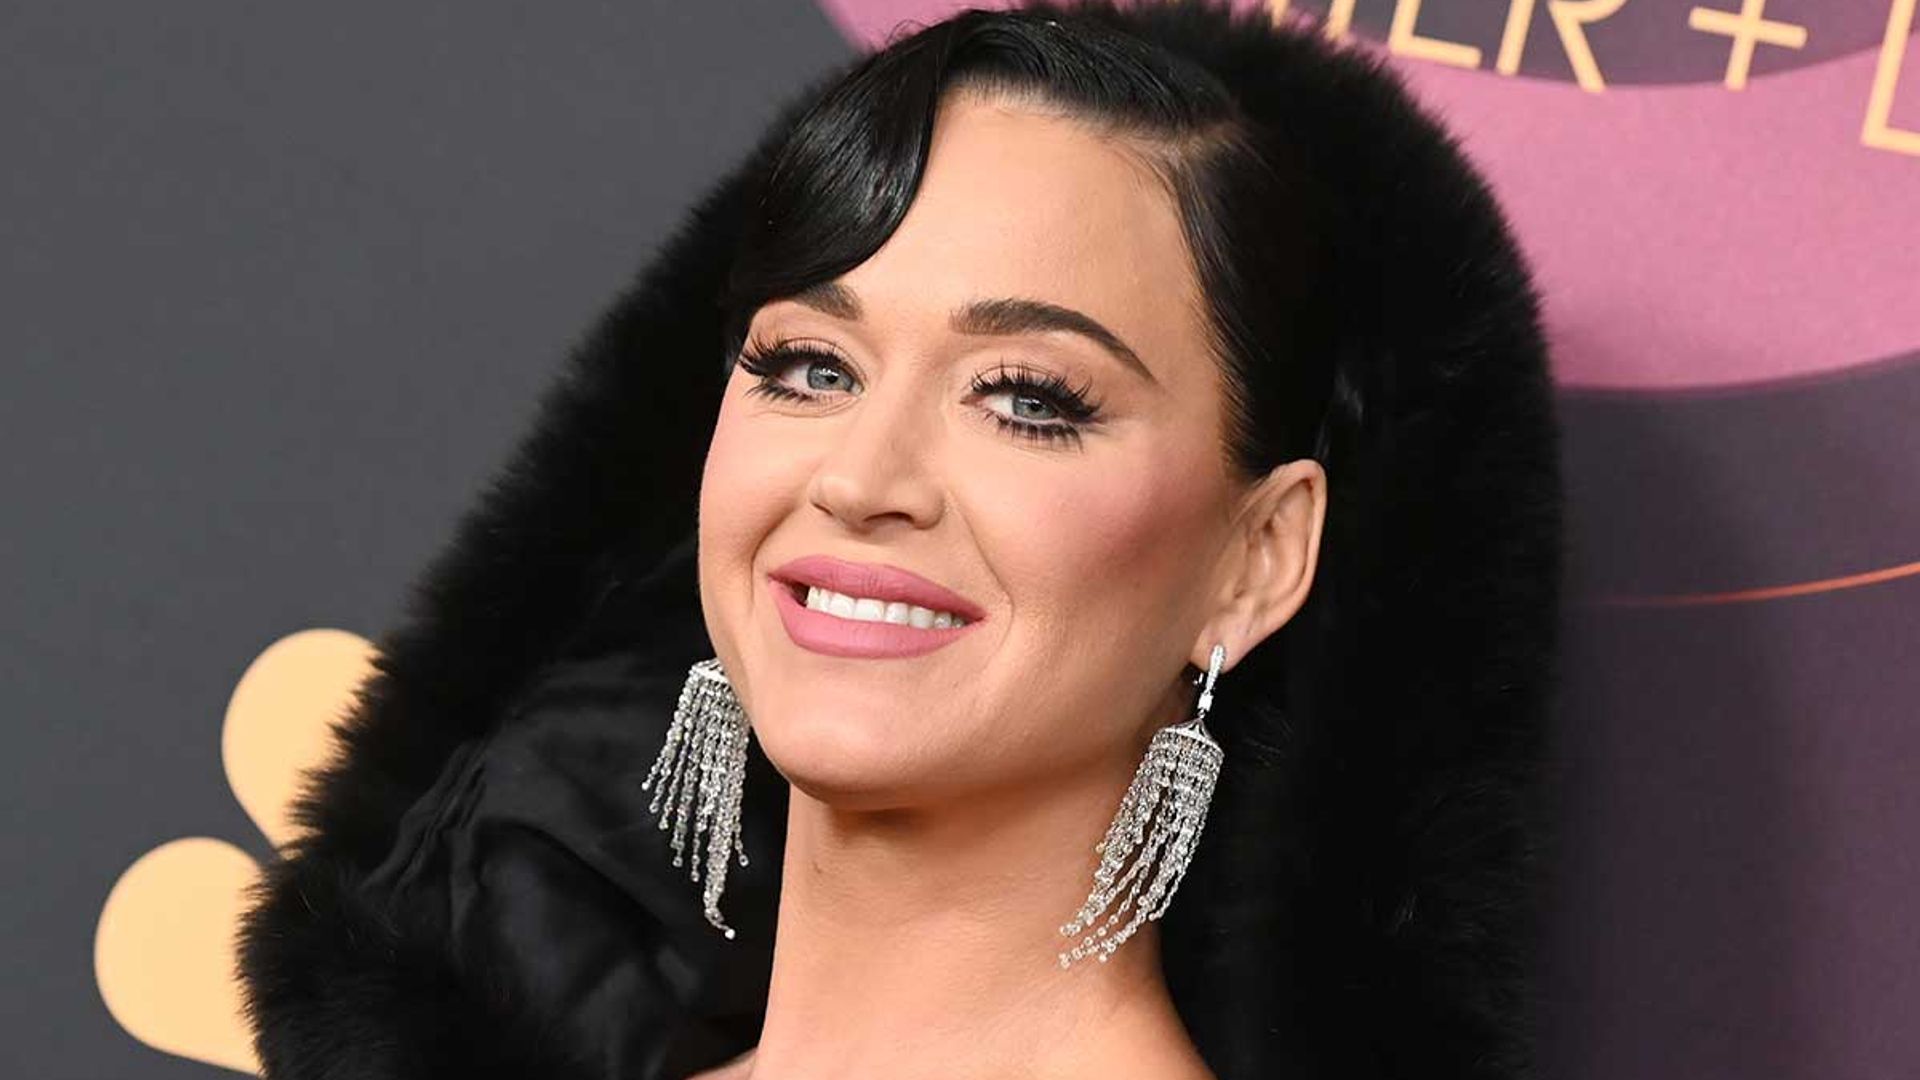 katy perry unrecognizable fresh faces photo sparks reaction